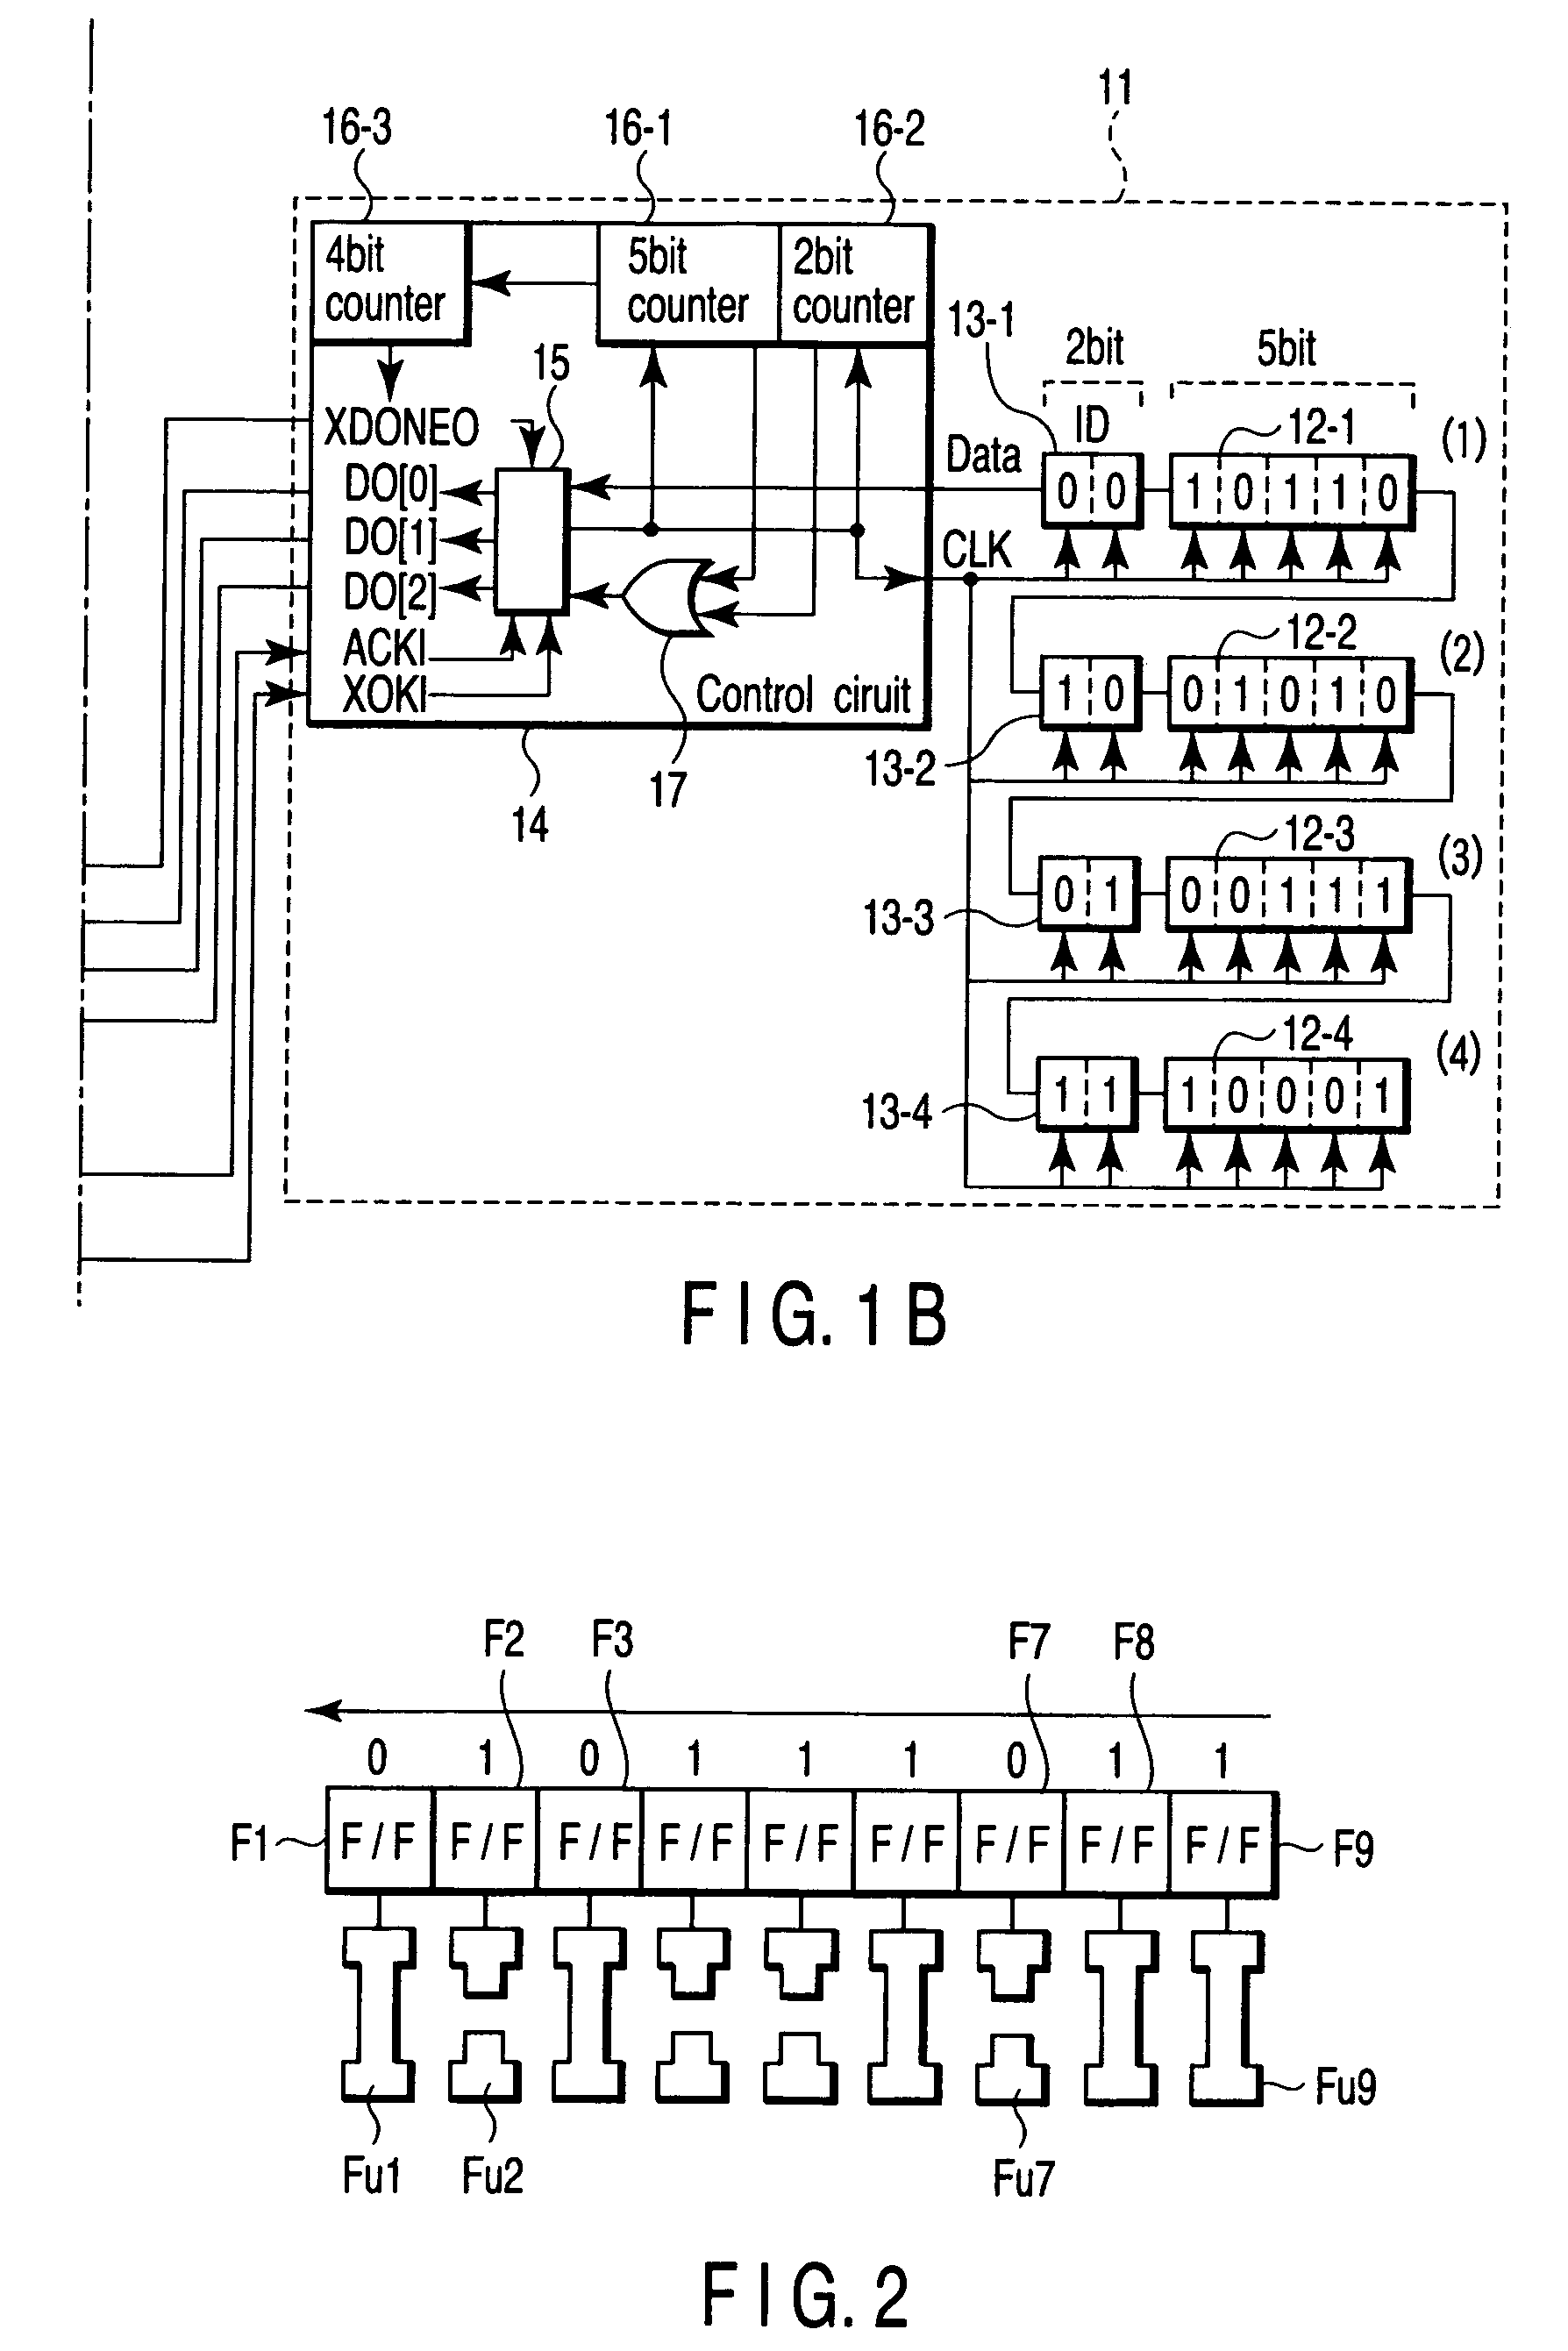 Asynchronous serial data apparatus for transferring data between one transmitter and a plurality of shift registers, avoiding skew during transmission